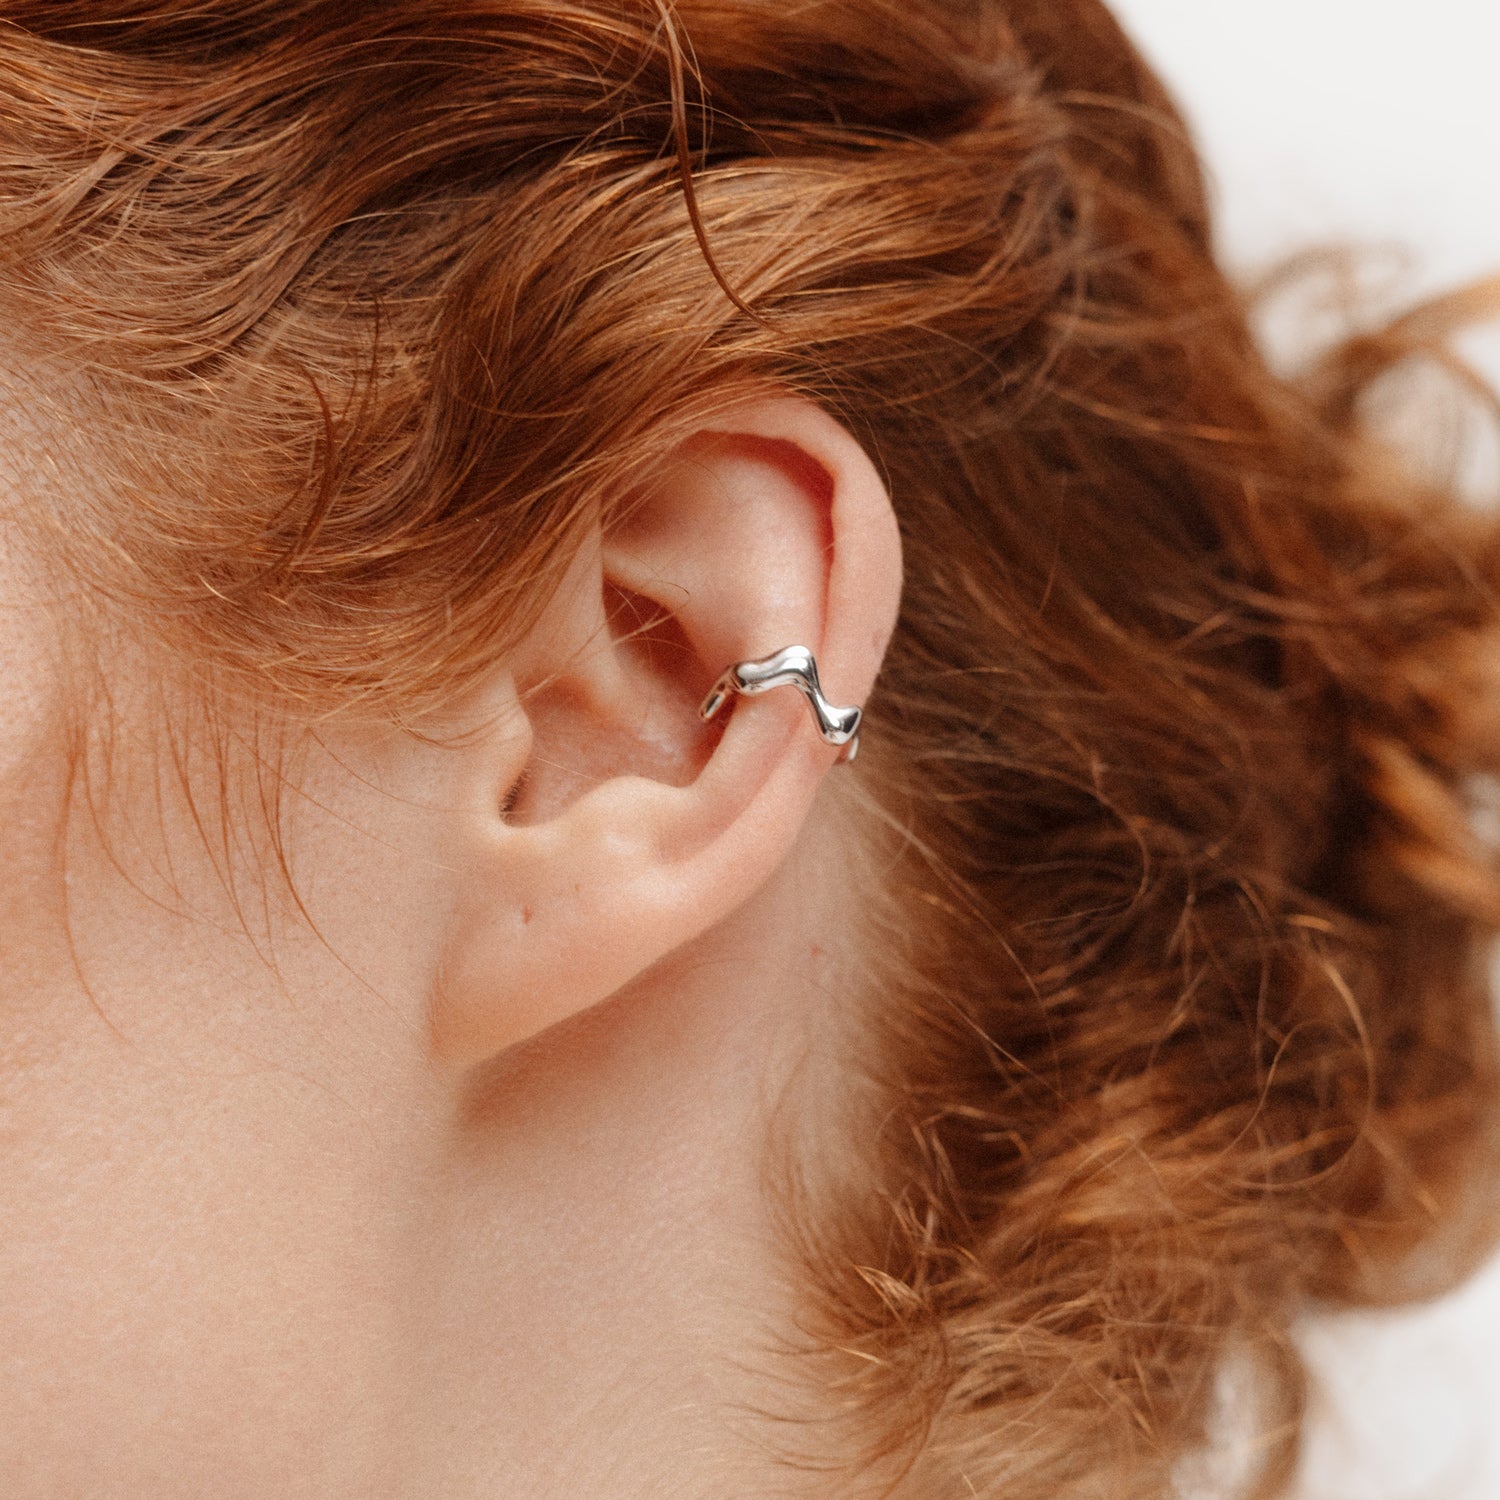 Poise Wave Ear Cuff, recycled Sterling Silver, shown on ear - VEYIA Berlin